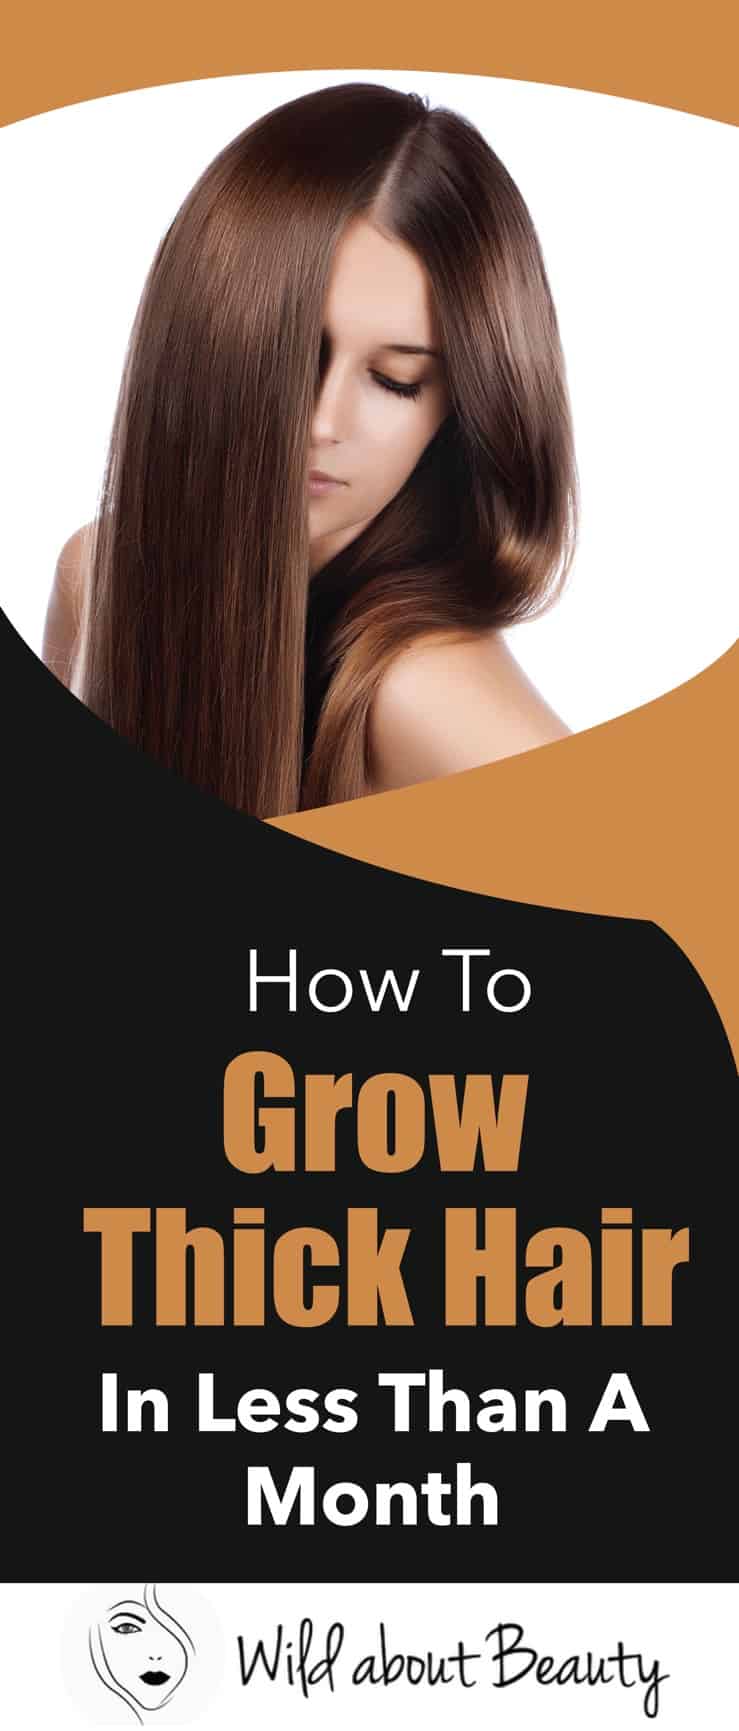 How To Grow Thick Hair